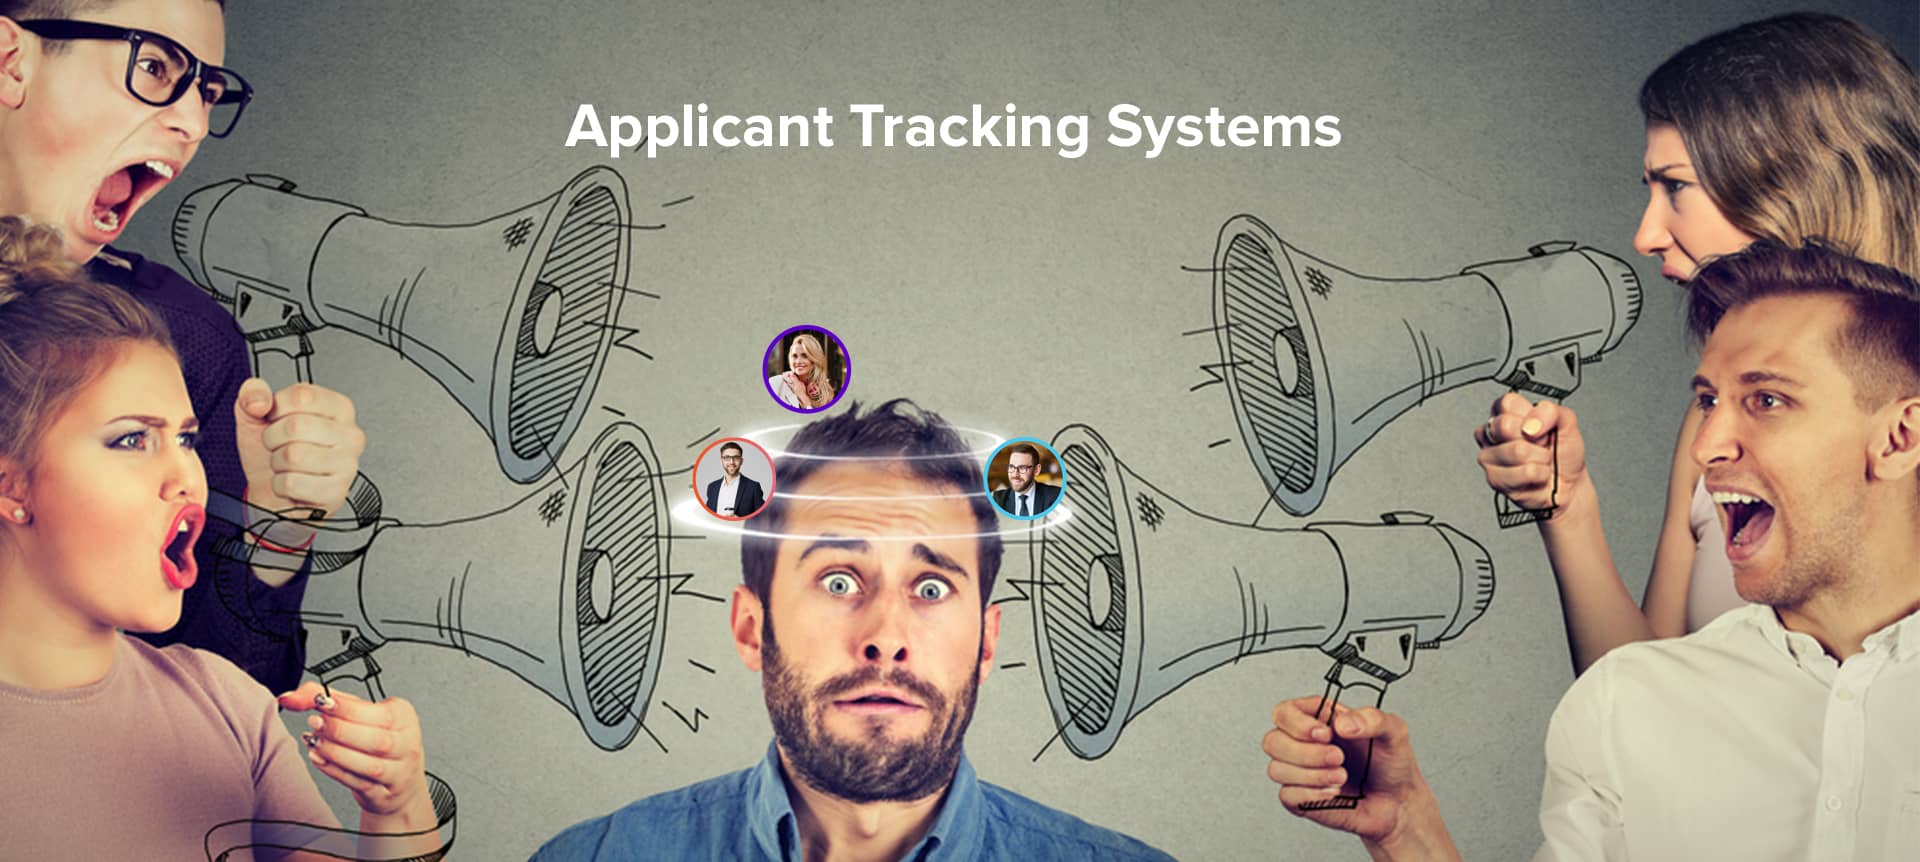 Leveraging an applicant tracking system